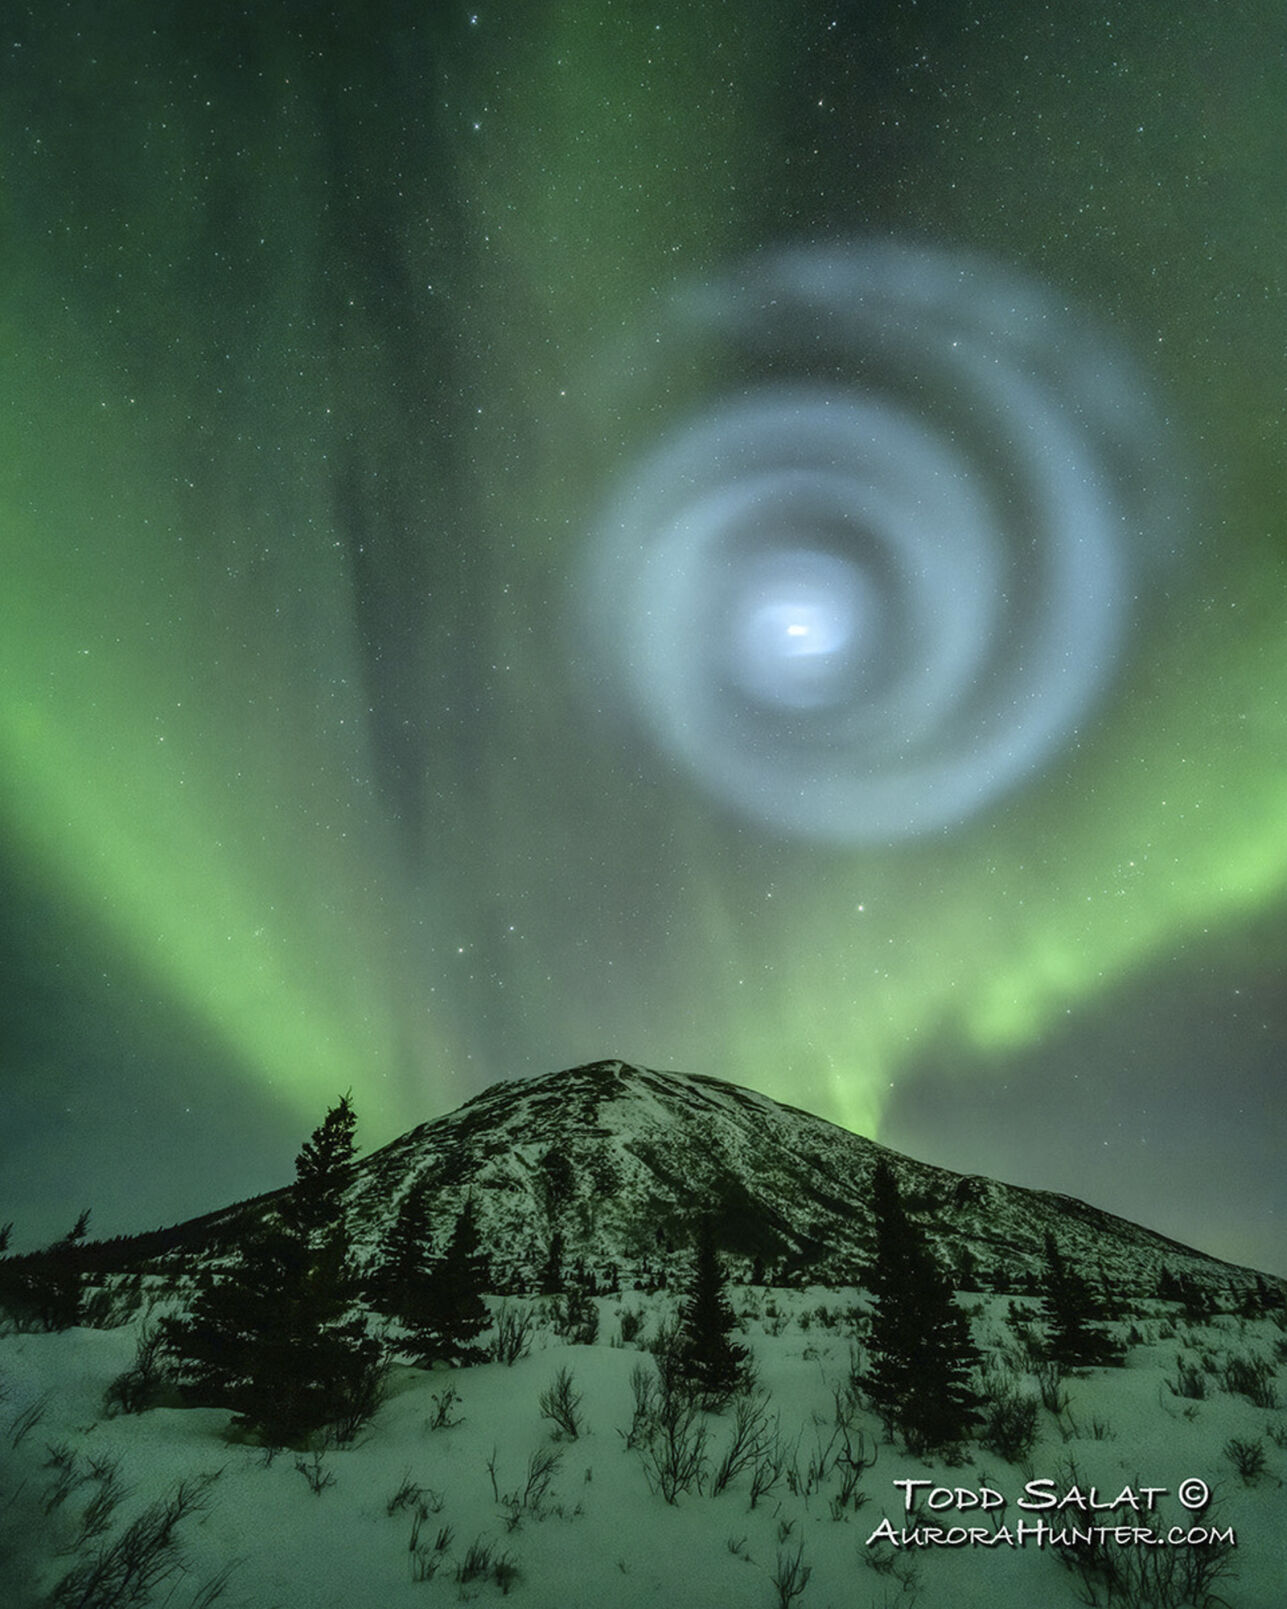 <p>In this photo provided by Todd Salat, northern light enthusiasts got a surprise early April 15, 2023, when something odd was mixed in with the green bands of light dancing above the Donnelly Dome near Delta Junction, Alaska. A light baby blue spiral resembling a galaxy appeared amid the aurora for a few minutes. The spiral was formed when excess fuel that had been released from a SpaceX rocket that launched from California about three hours earlier turned to ice, and then the water vapor reflected the sunlight in the upper atmosphere. (Todd Salat via AP)</p>   PHOTO CREDIT: Todd Salat - handout one time use, Todd Salat